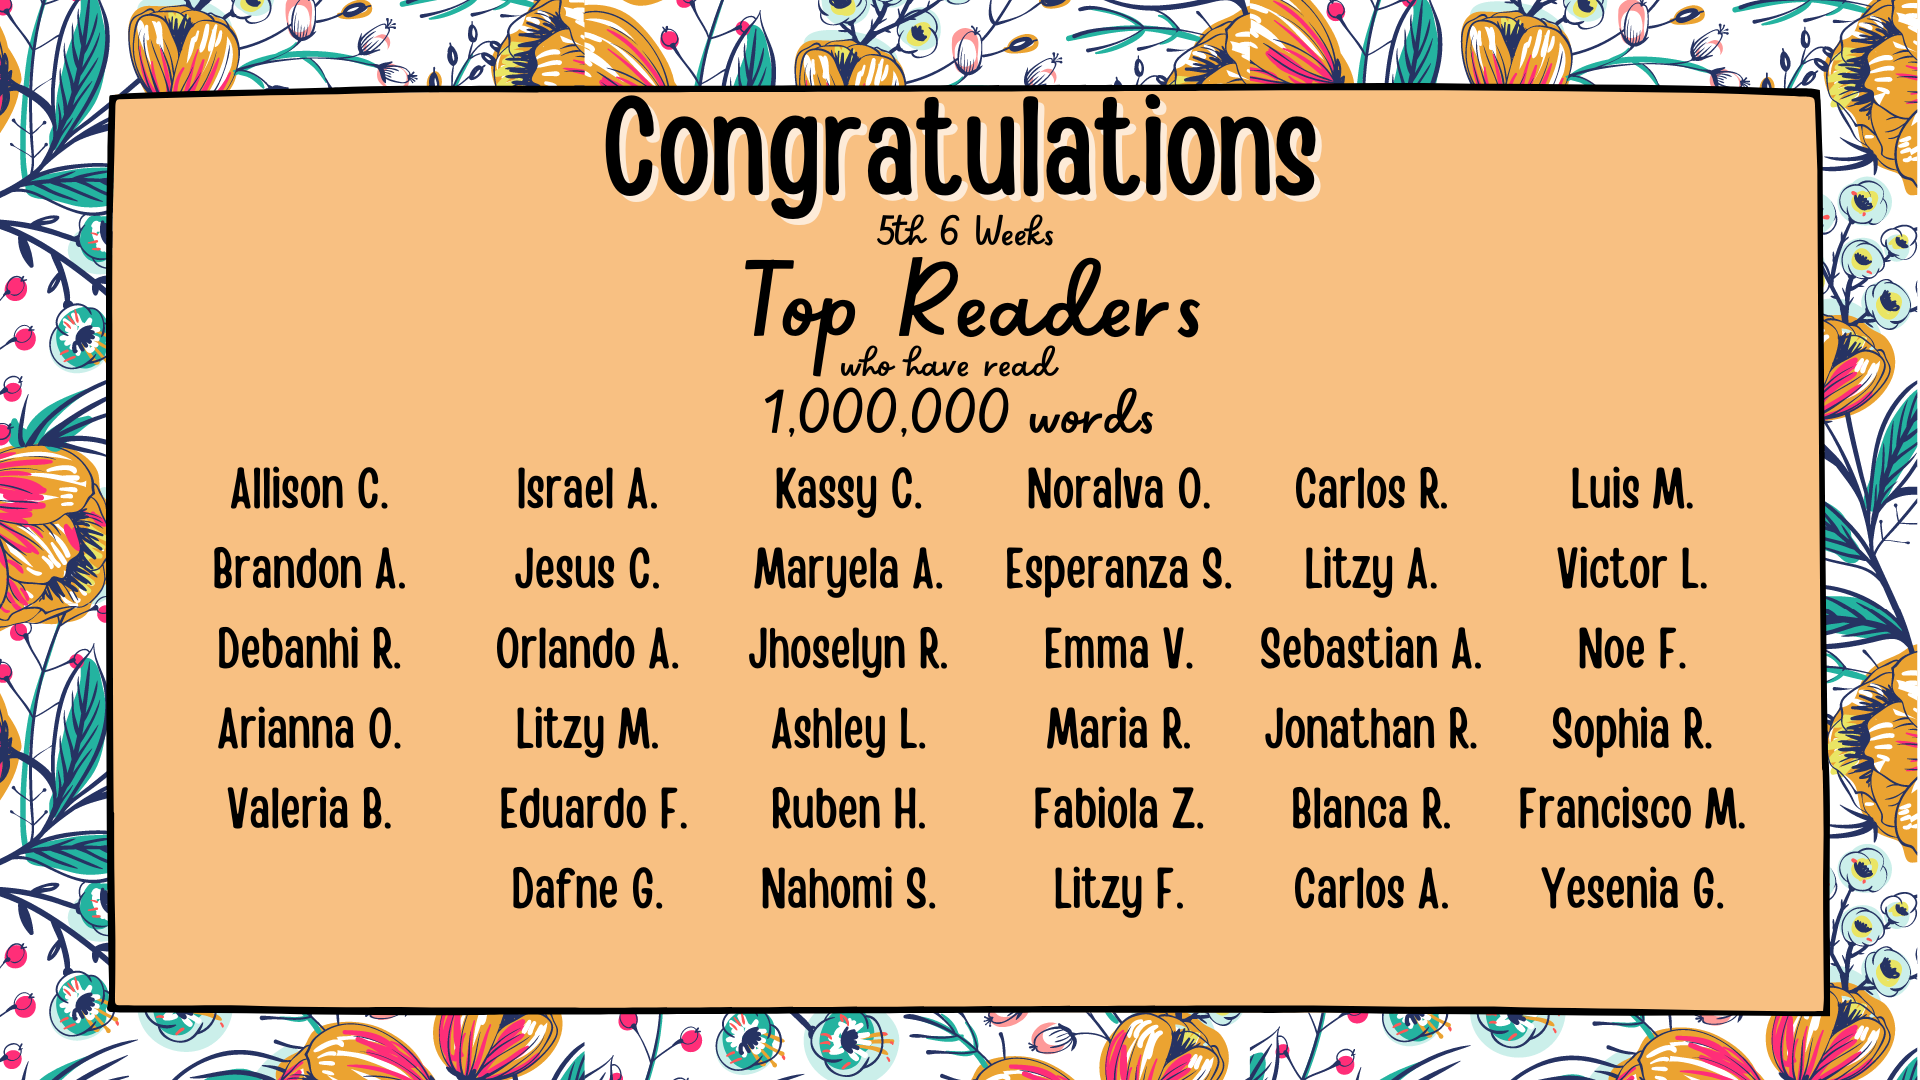 Congratulations 5th 6 weeks top readers who have read more than 1,000,000 words. List of student names